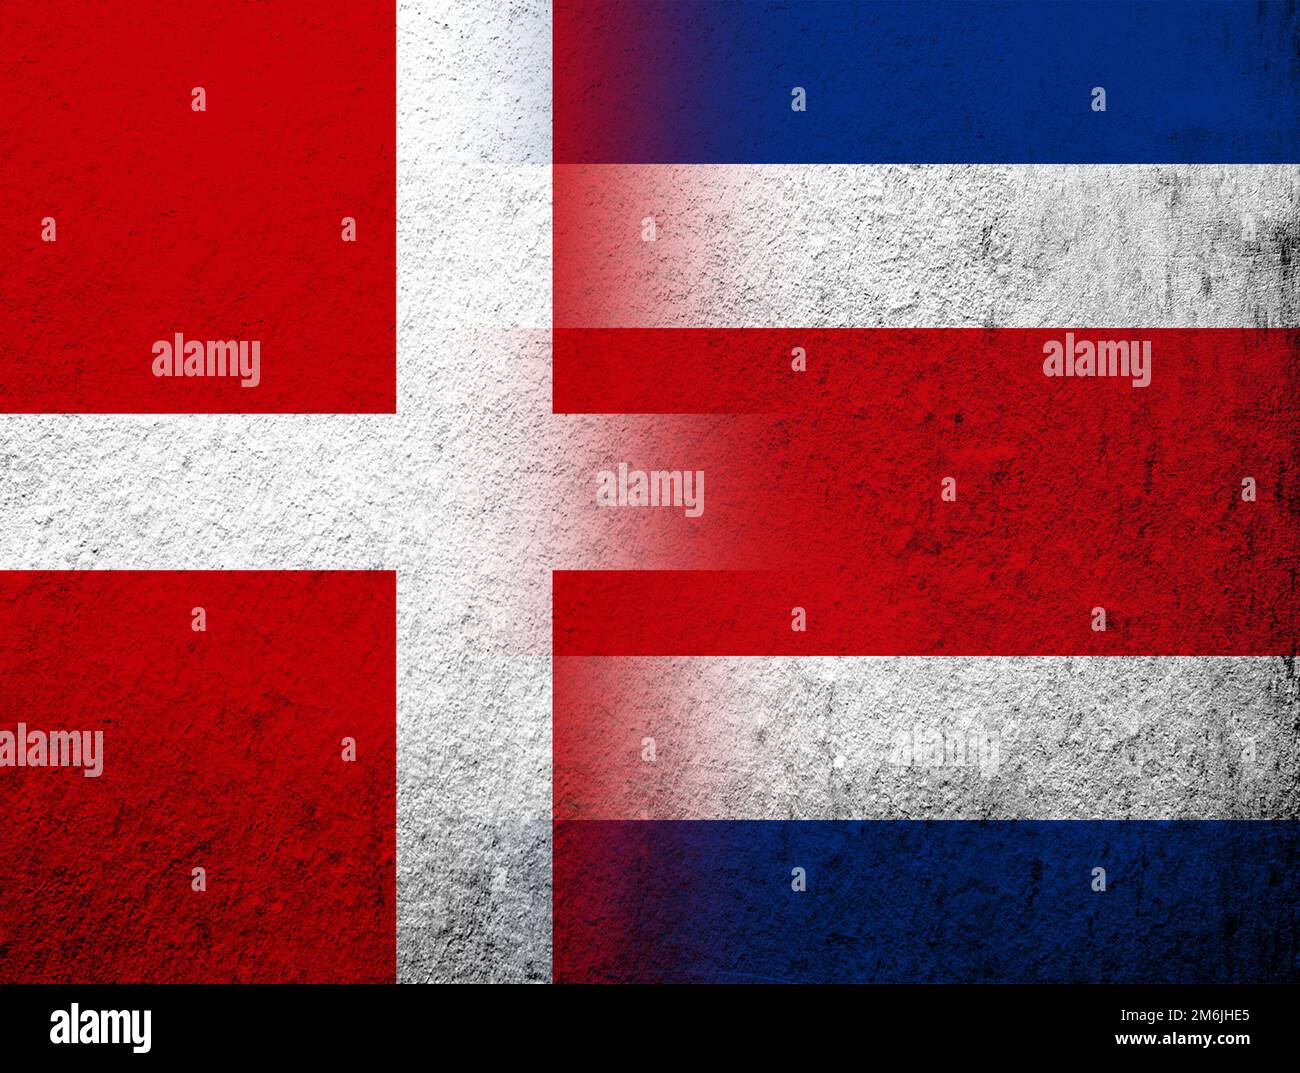 The Kingdom of Denmark National flag with the Republic of Costa Rica National flag. Grunge Background Stock Photo